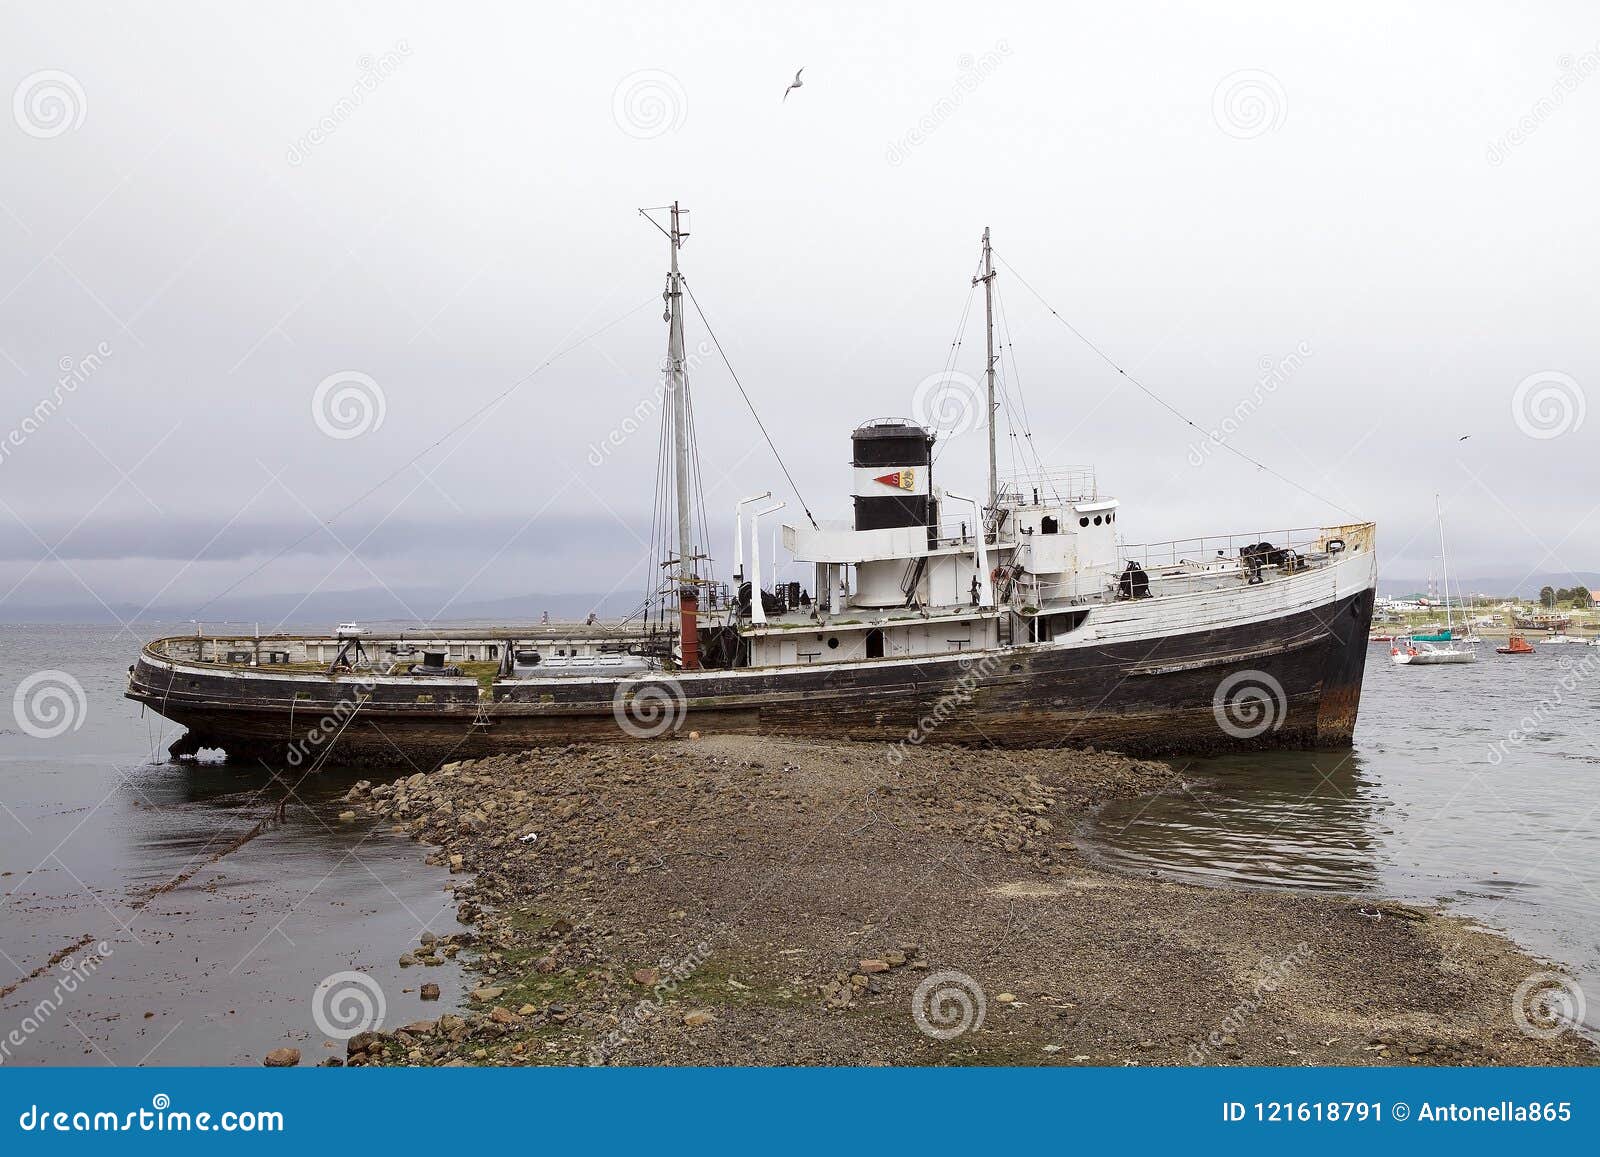 shipwreck in the port of ushuaia, argentina